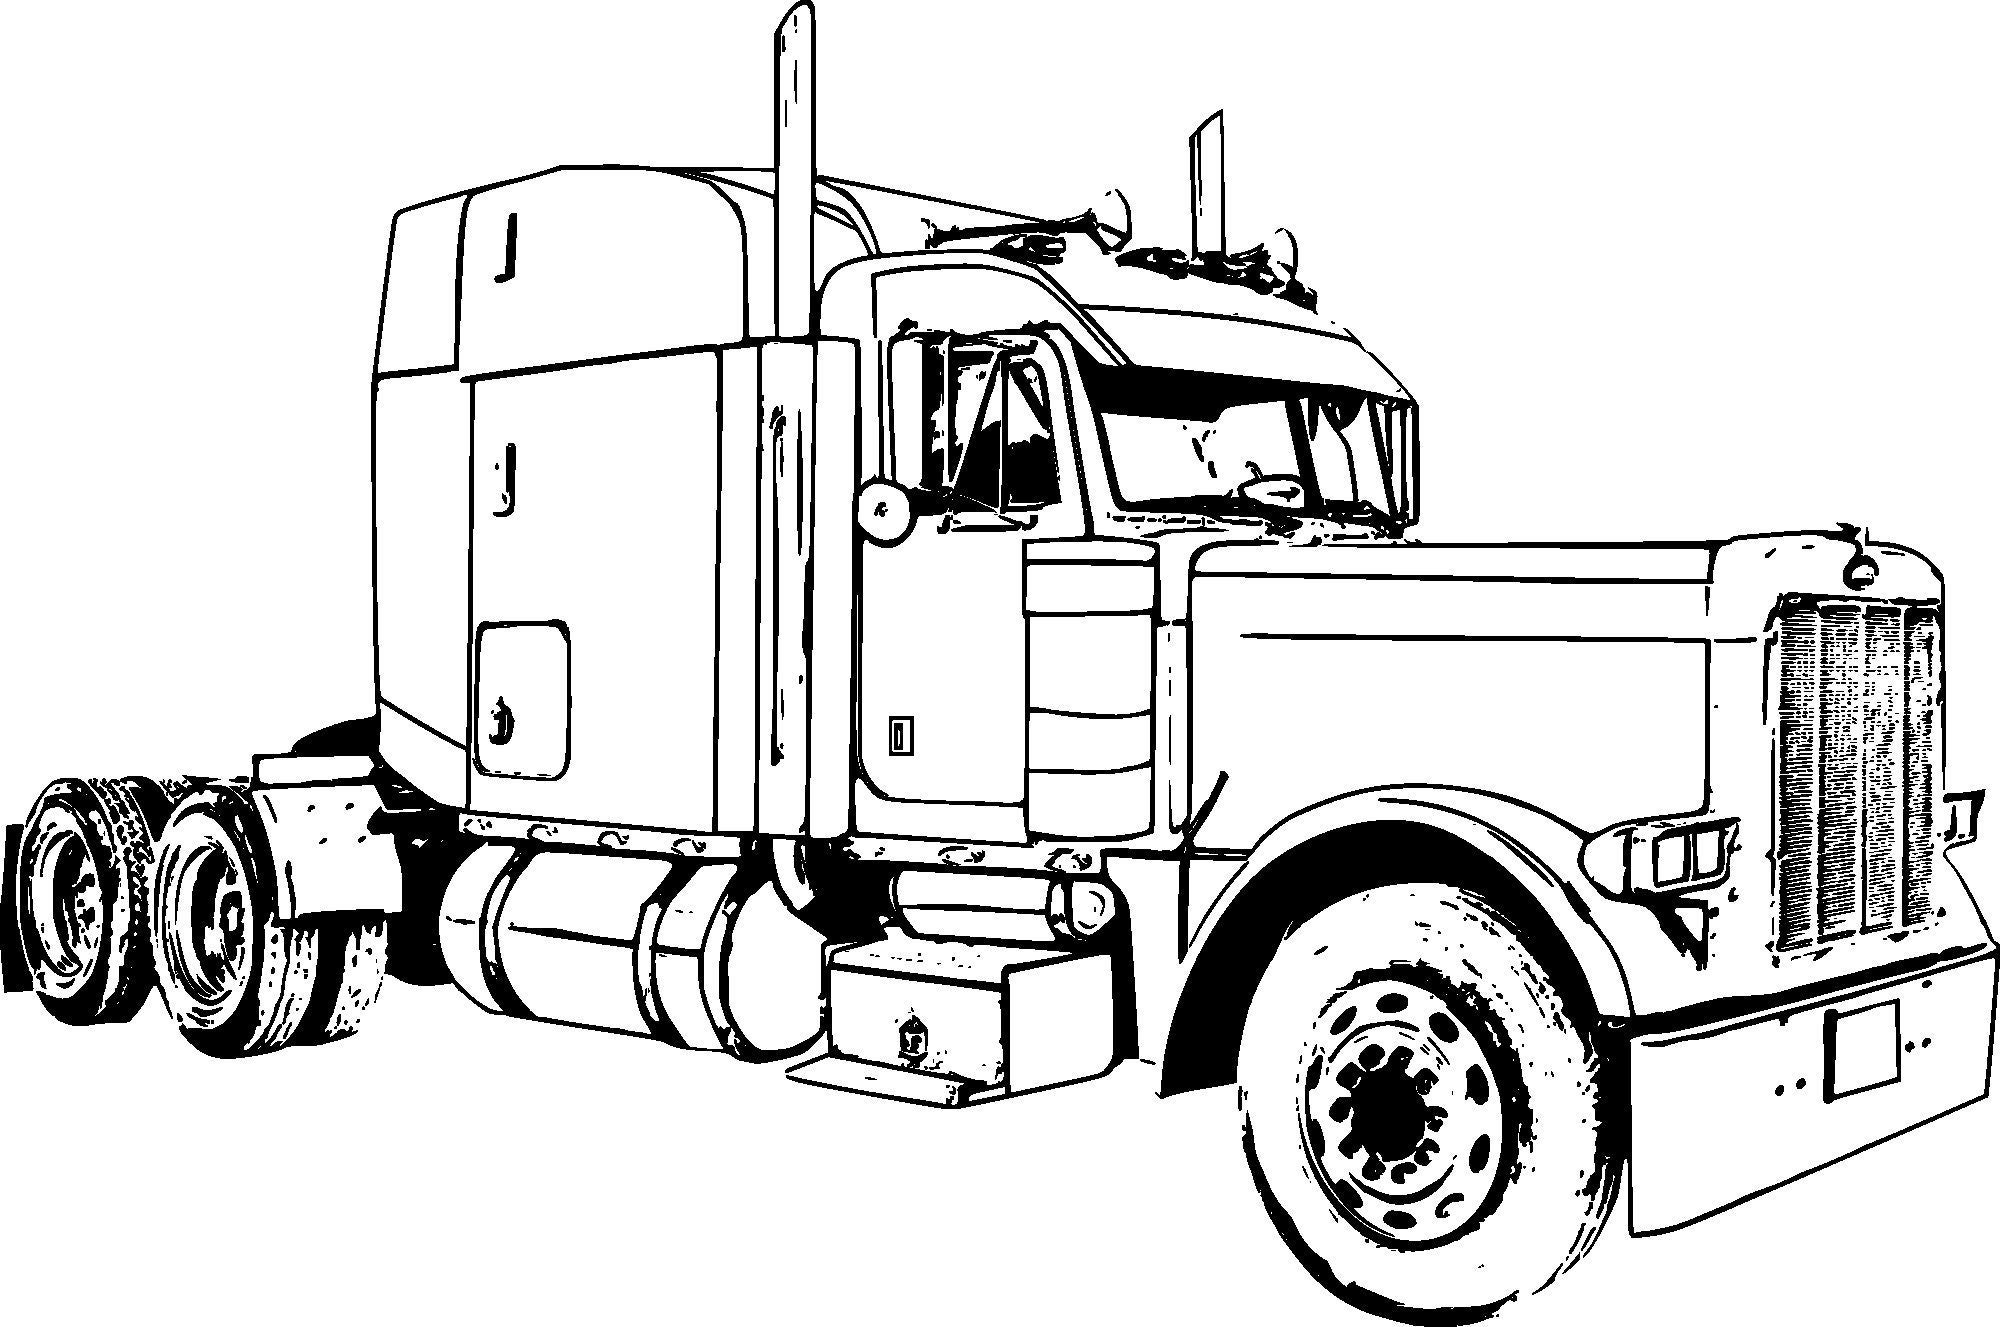 Big rig truck coloring page poster